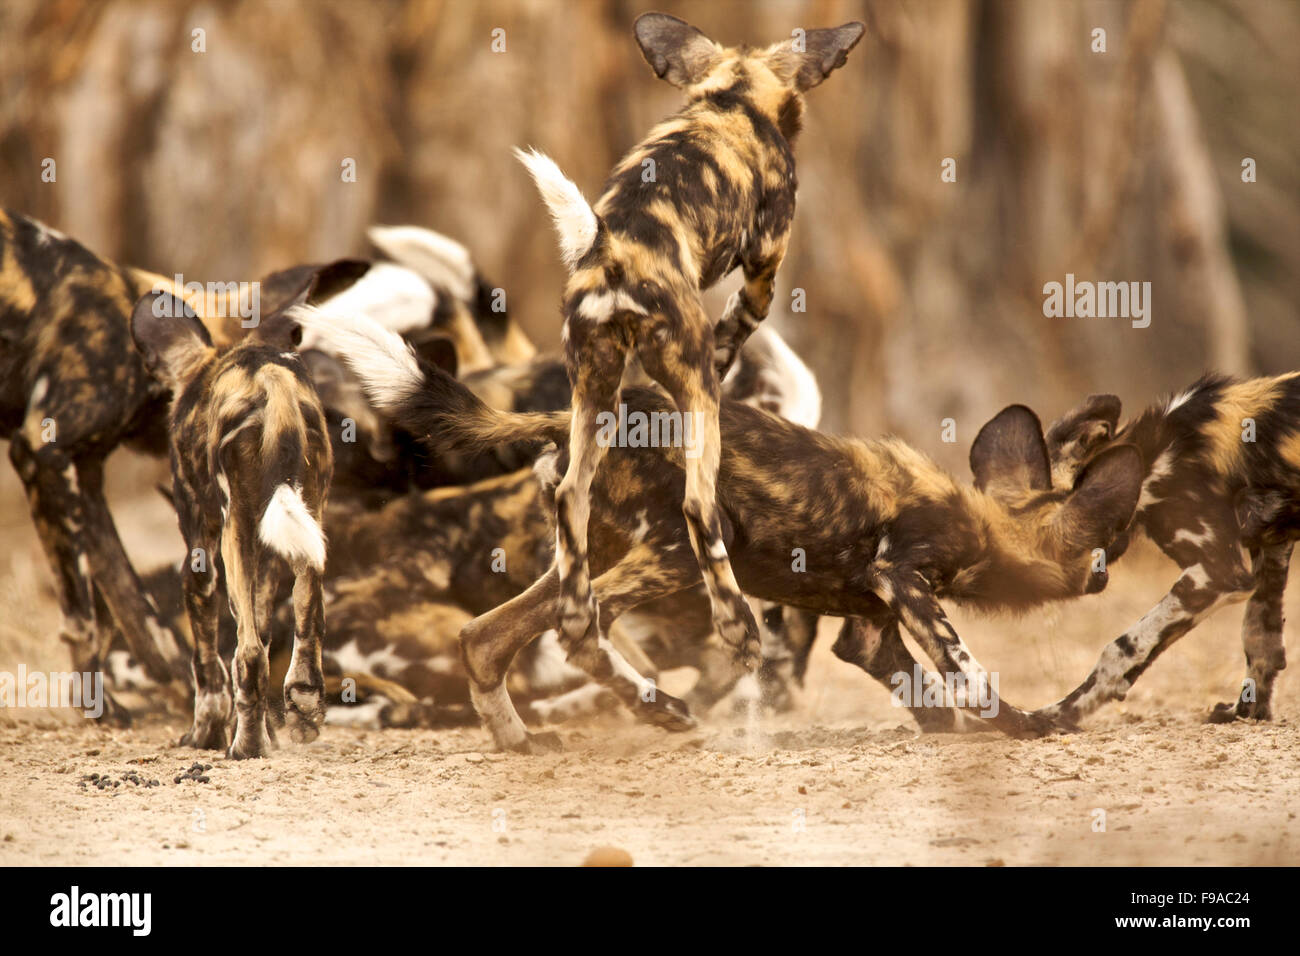 A pack of wild dogs interacting at the Mana Pools, Zimbabwe Stock Photo